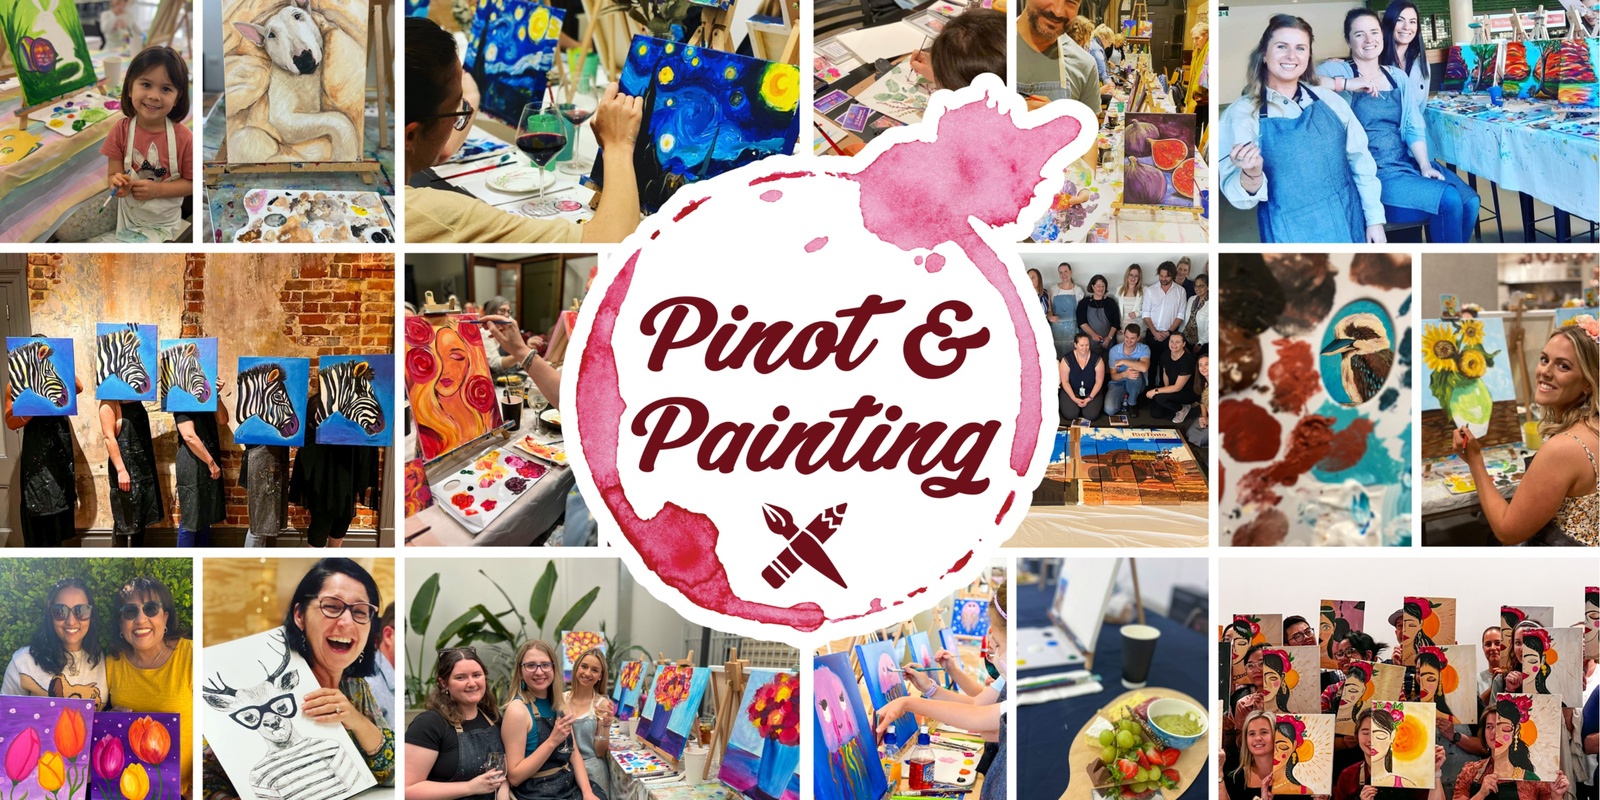 Pinot & Painting's banner